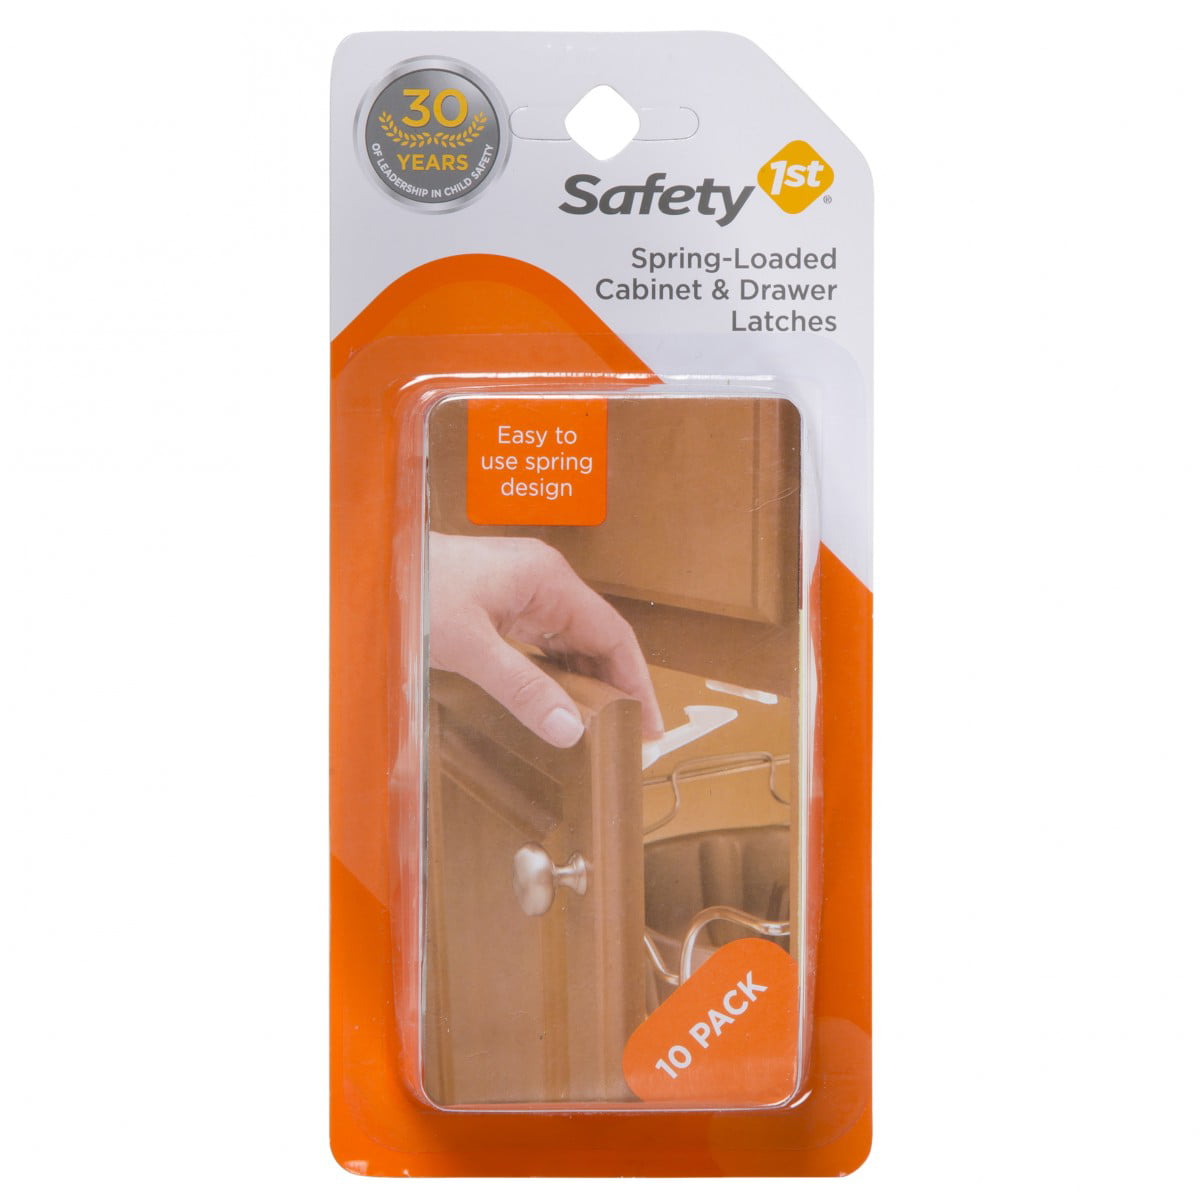 Safety 1st SpringLoaded & Drawer Latch 10 Pack Walmart Canada